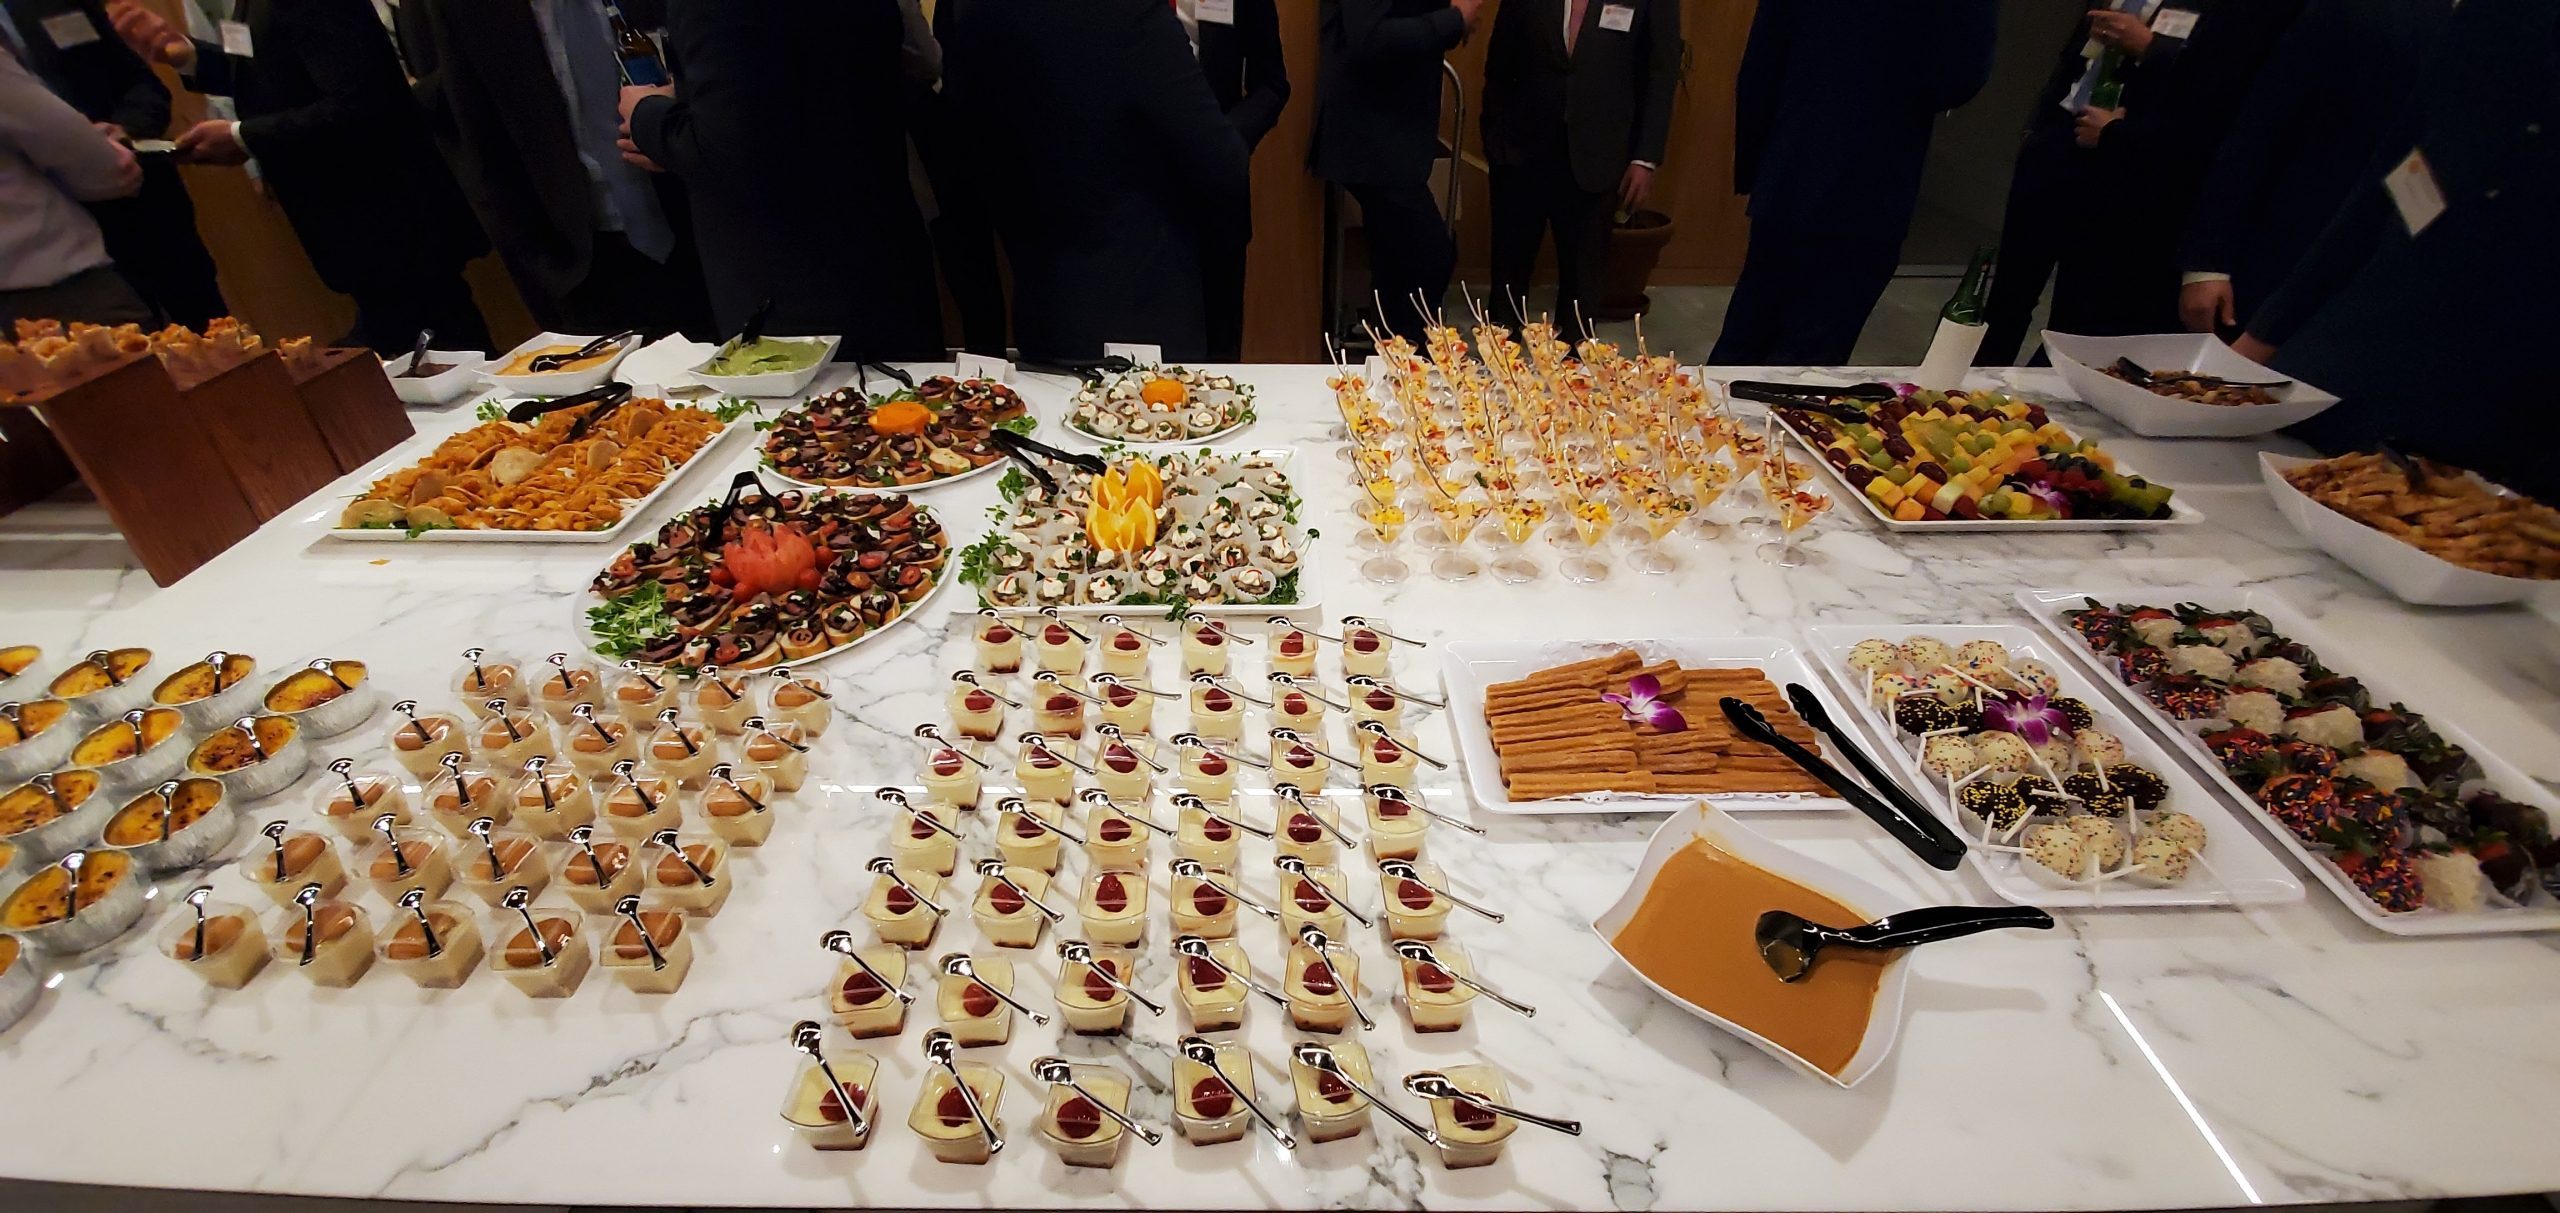 Hot Chocolate Bar Catering – Gotham Catering And Events, New York, NY  Catering